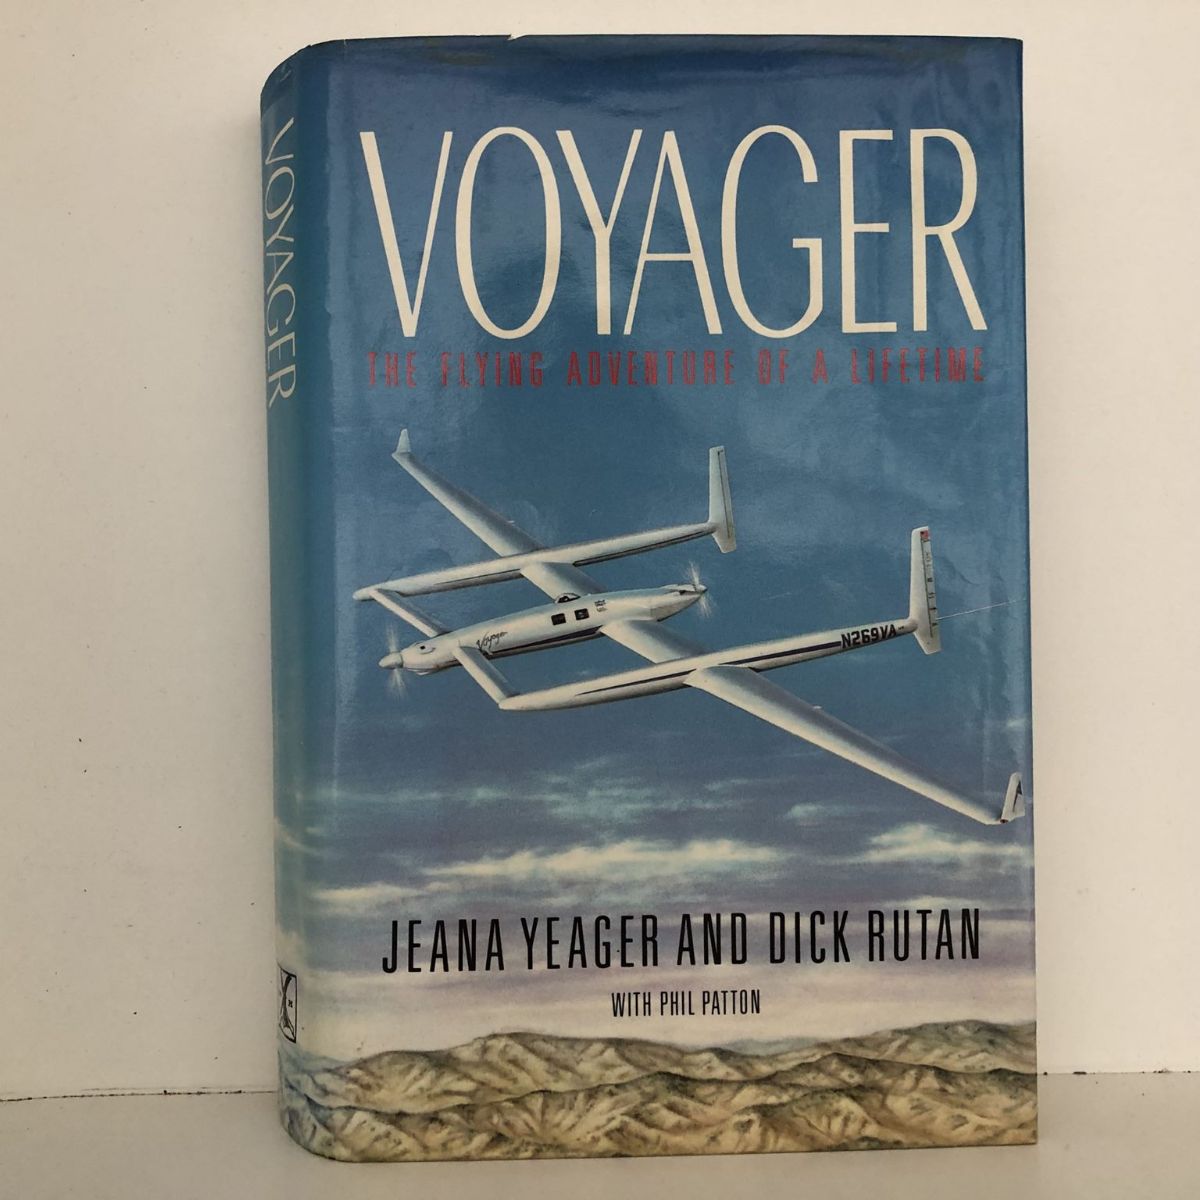 VOYAGER: The Flying Adventure of a Lifetime